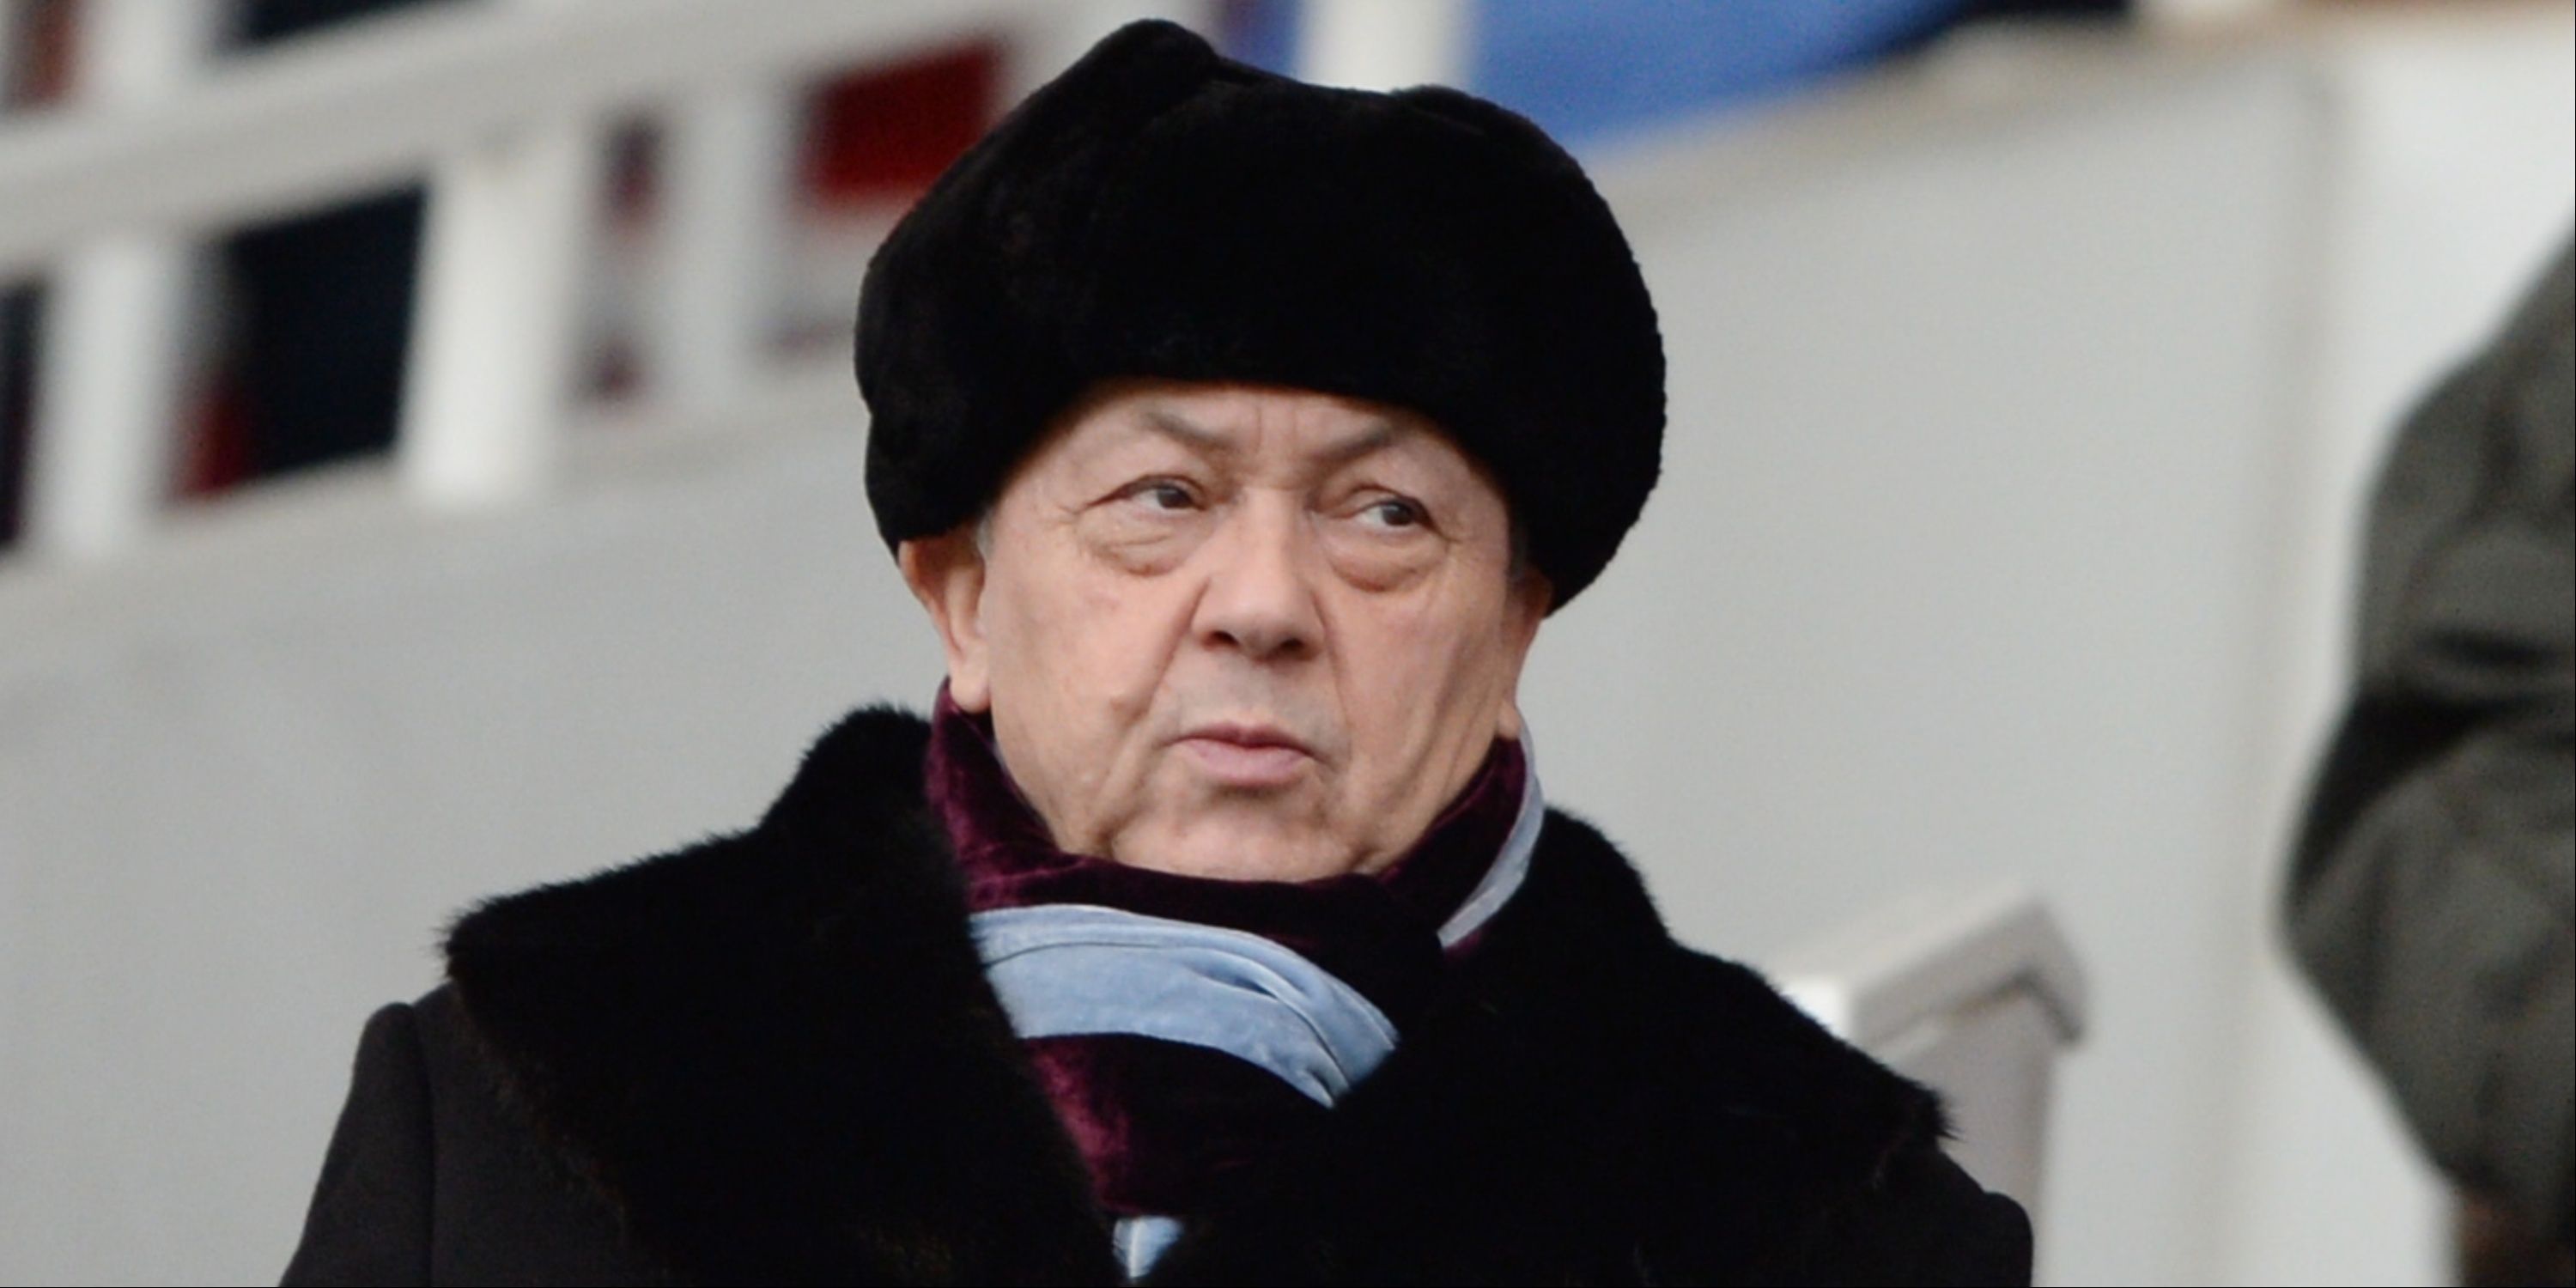 West Ham United co-owner David Sullivan watching on from the London Stadium stands